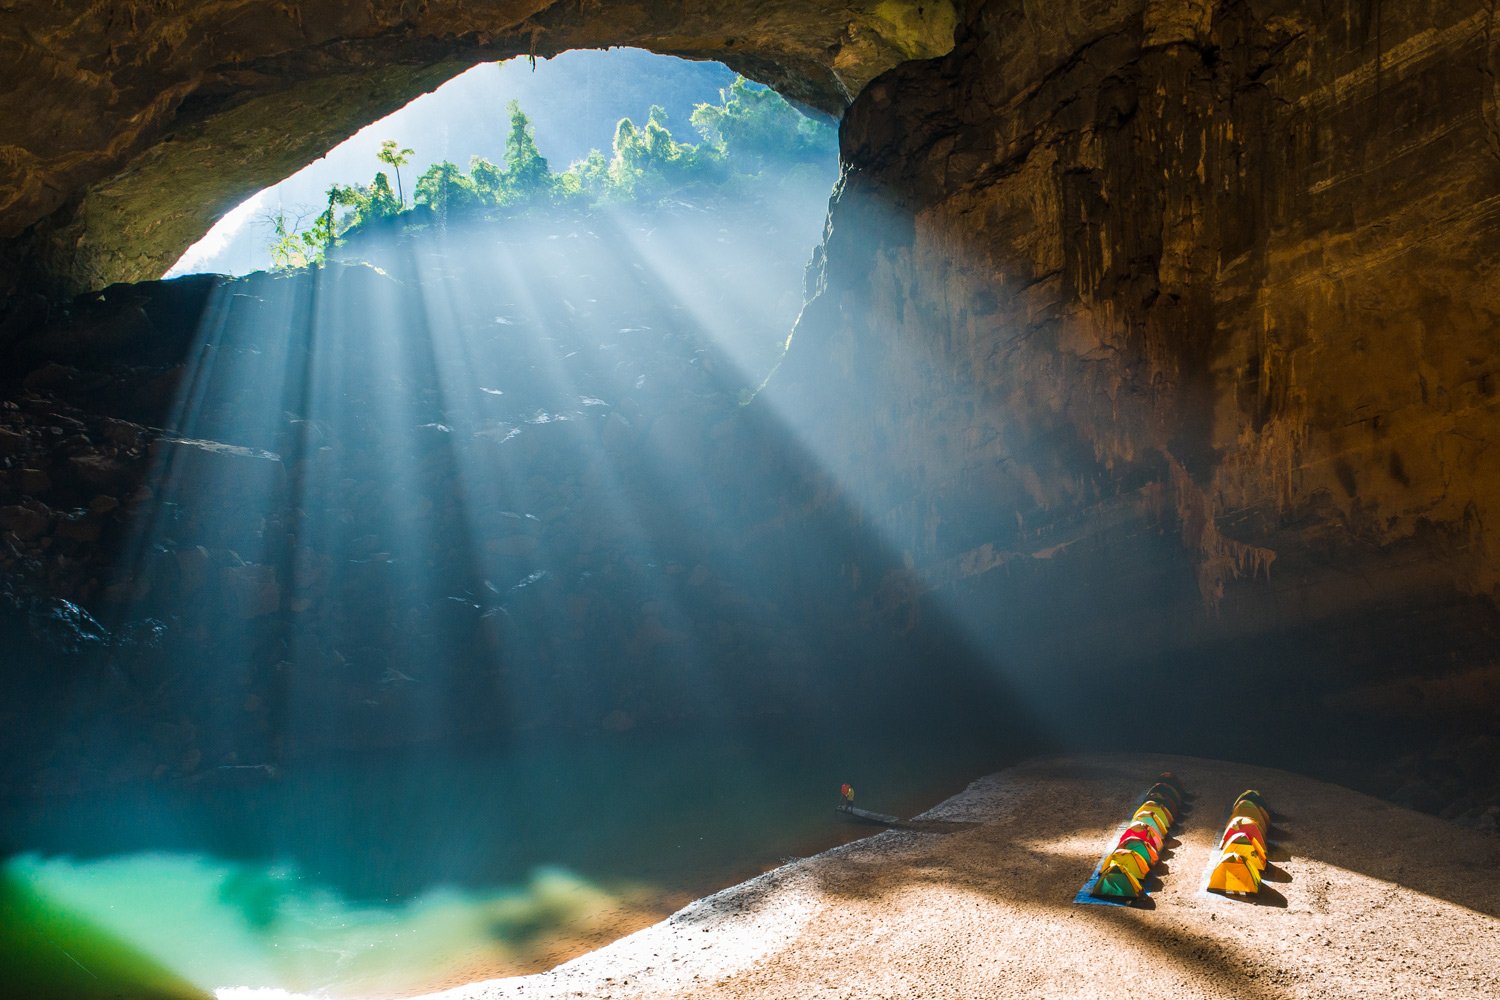 Hang En Cave welcomes rare and enormous sunbeams that shine through the cave entrance from December to March.